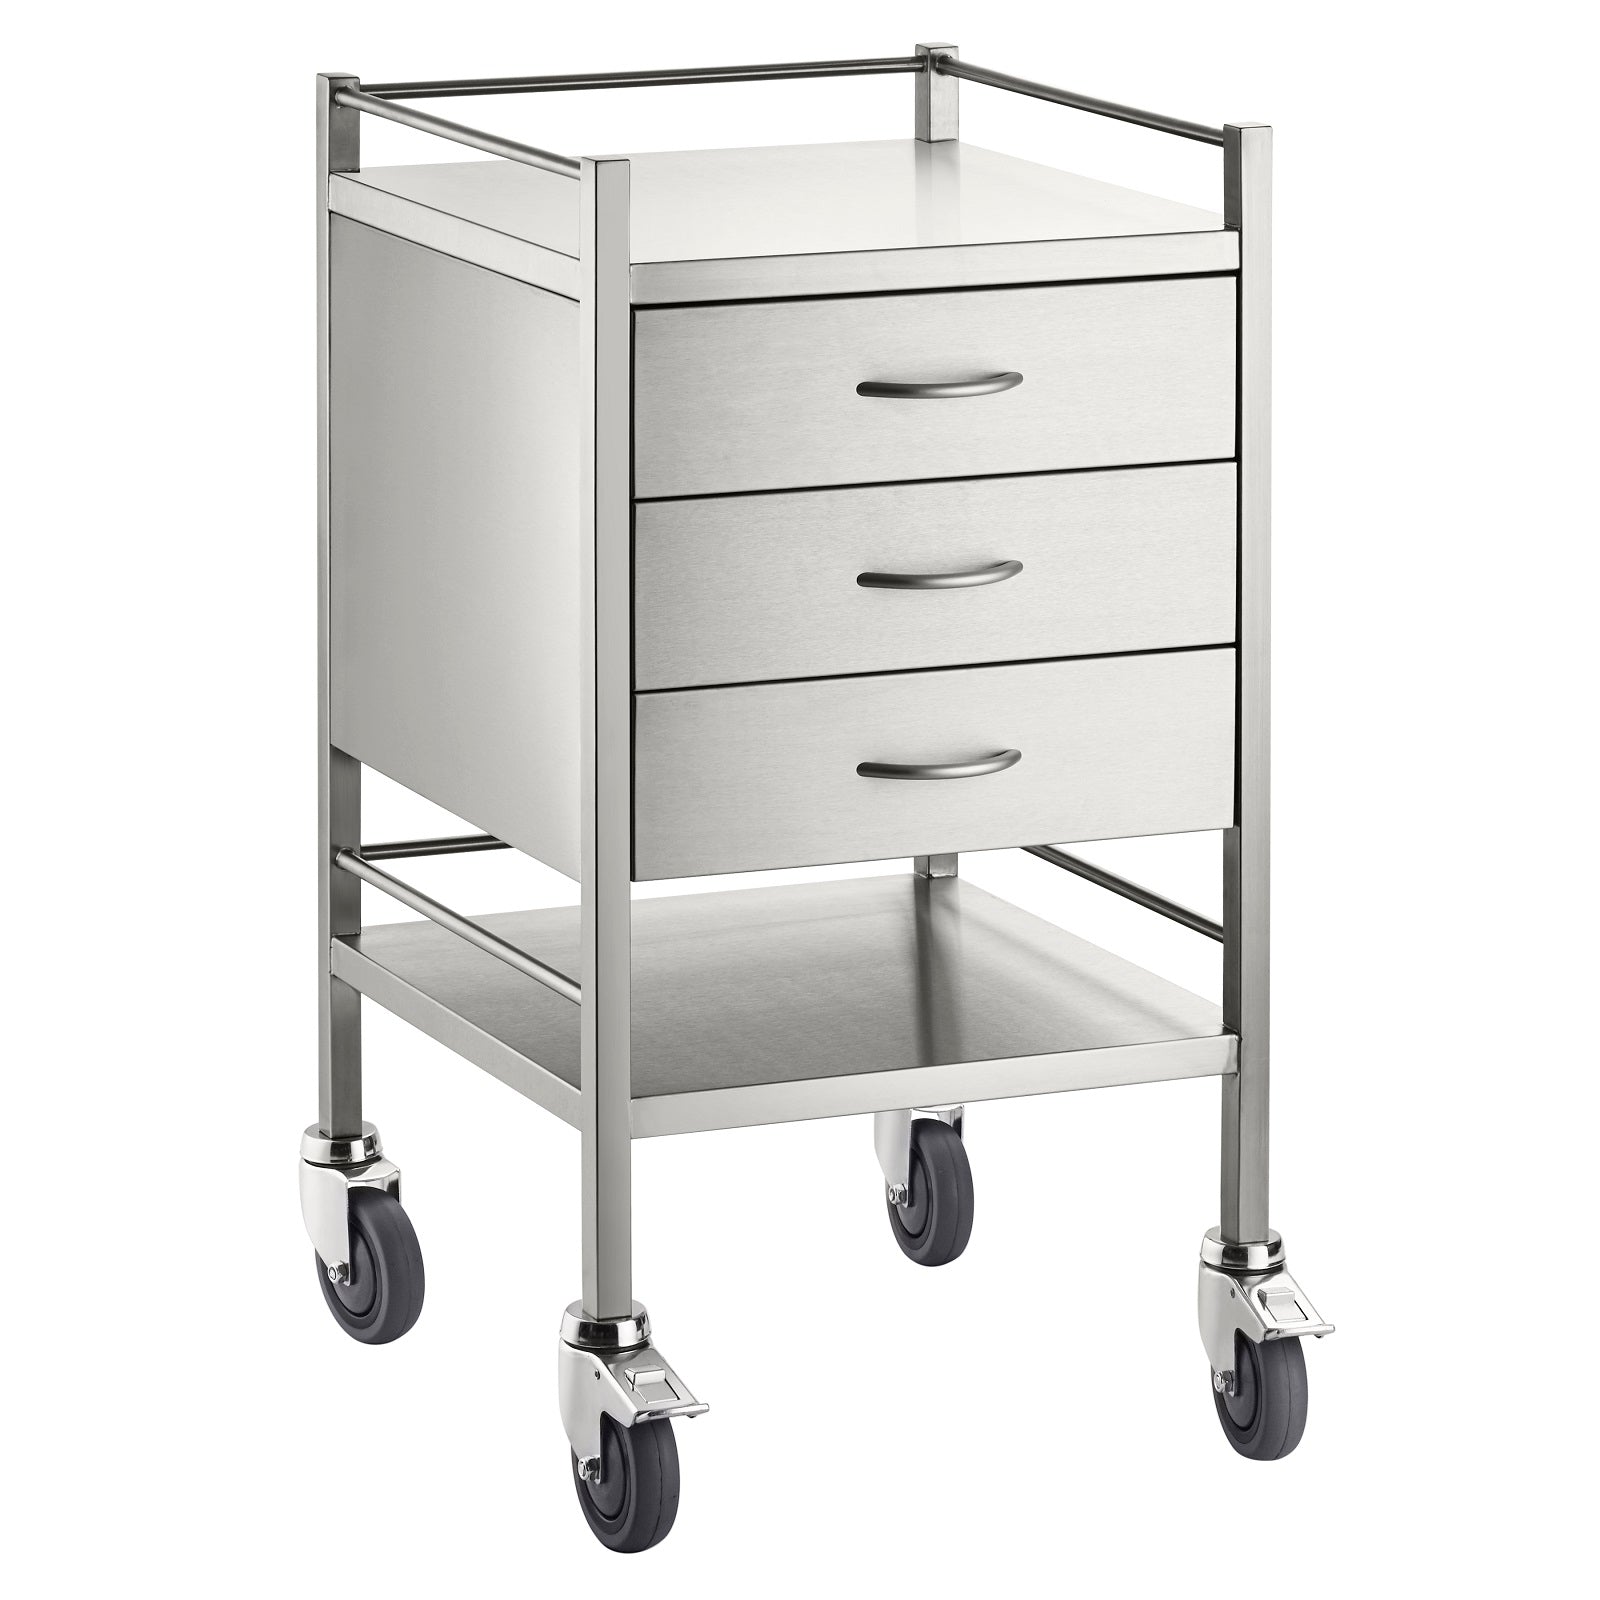 A high grade three drawer stainless steel trolley with smooth rolling castors, shelf, rails and an outstanding finish.